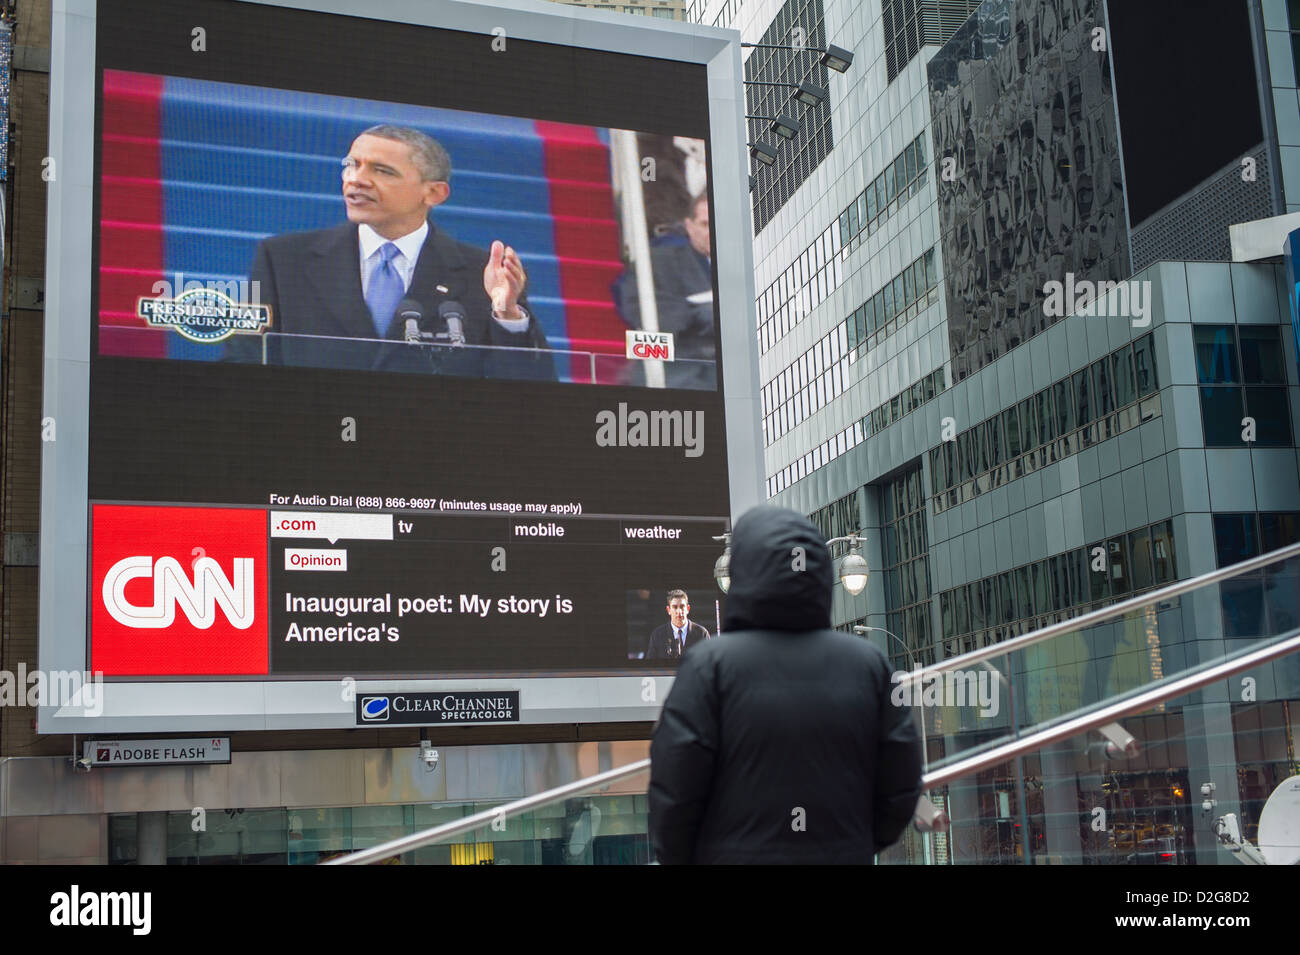 Passer-by gather in Times Square in New York on Monday, January 21, 2013 to watch the inauguration of Barack Obama Stock Photo